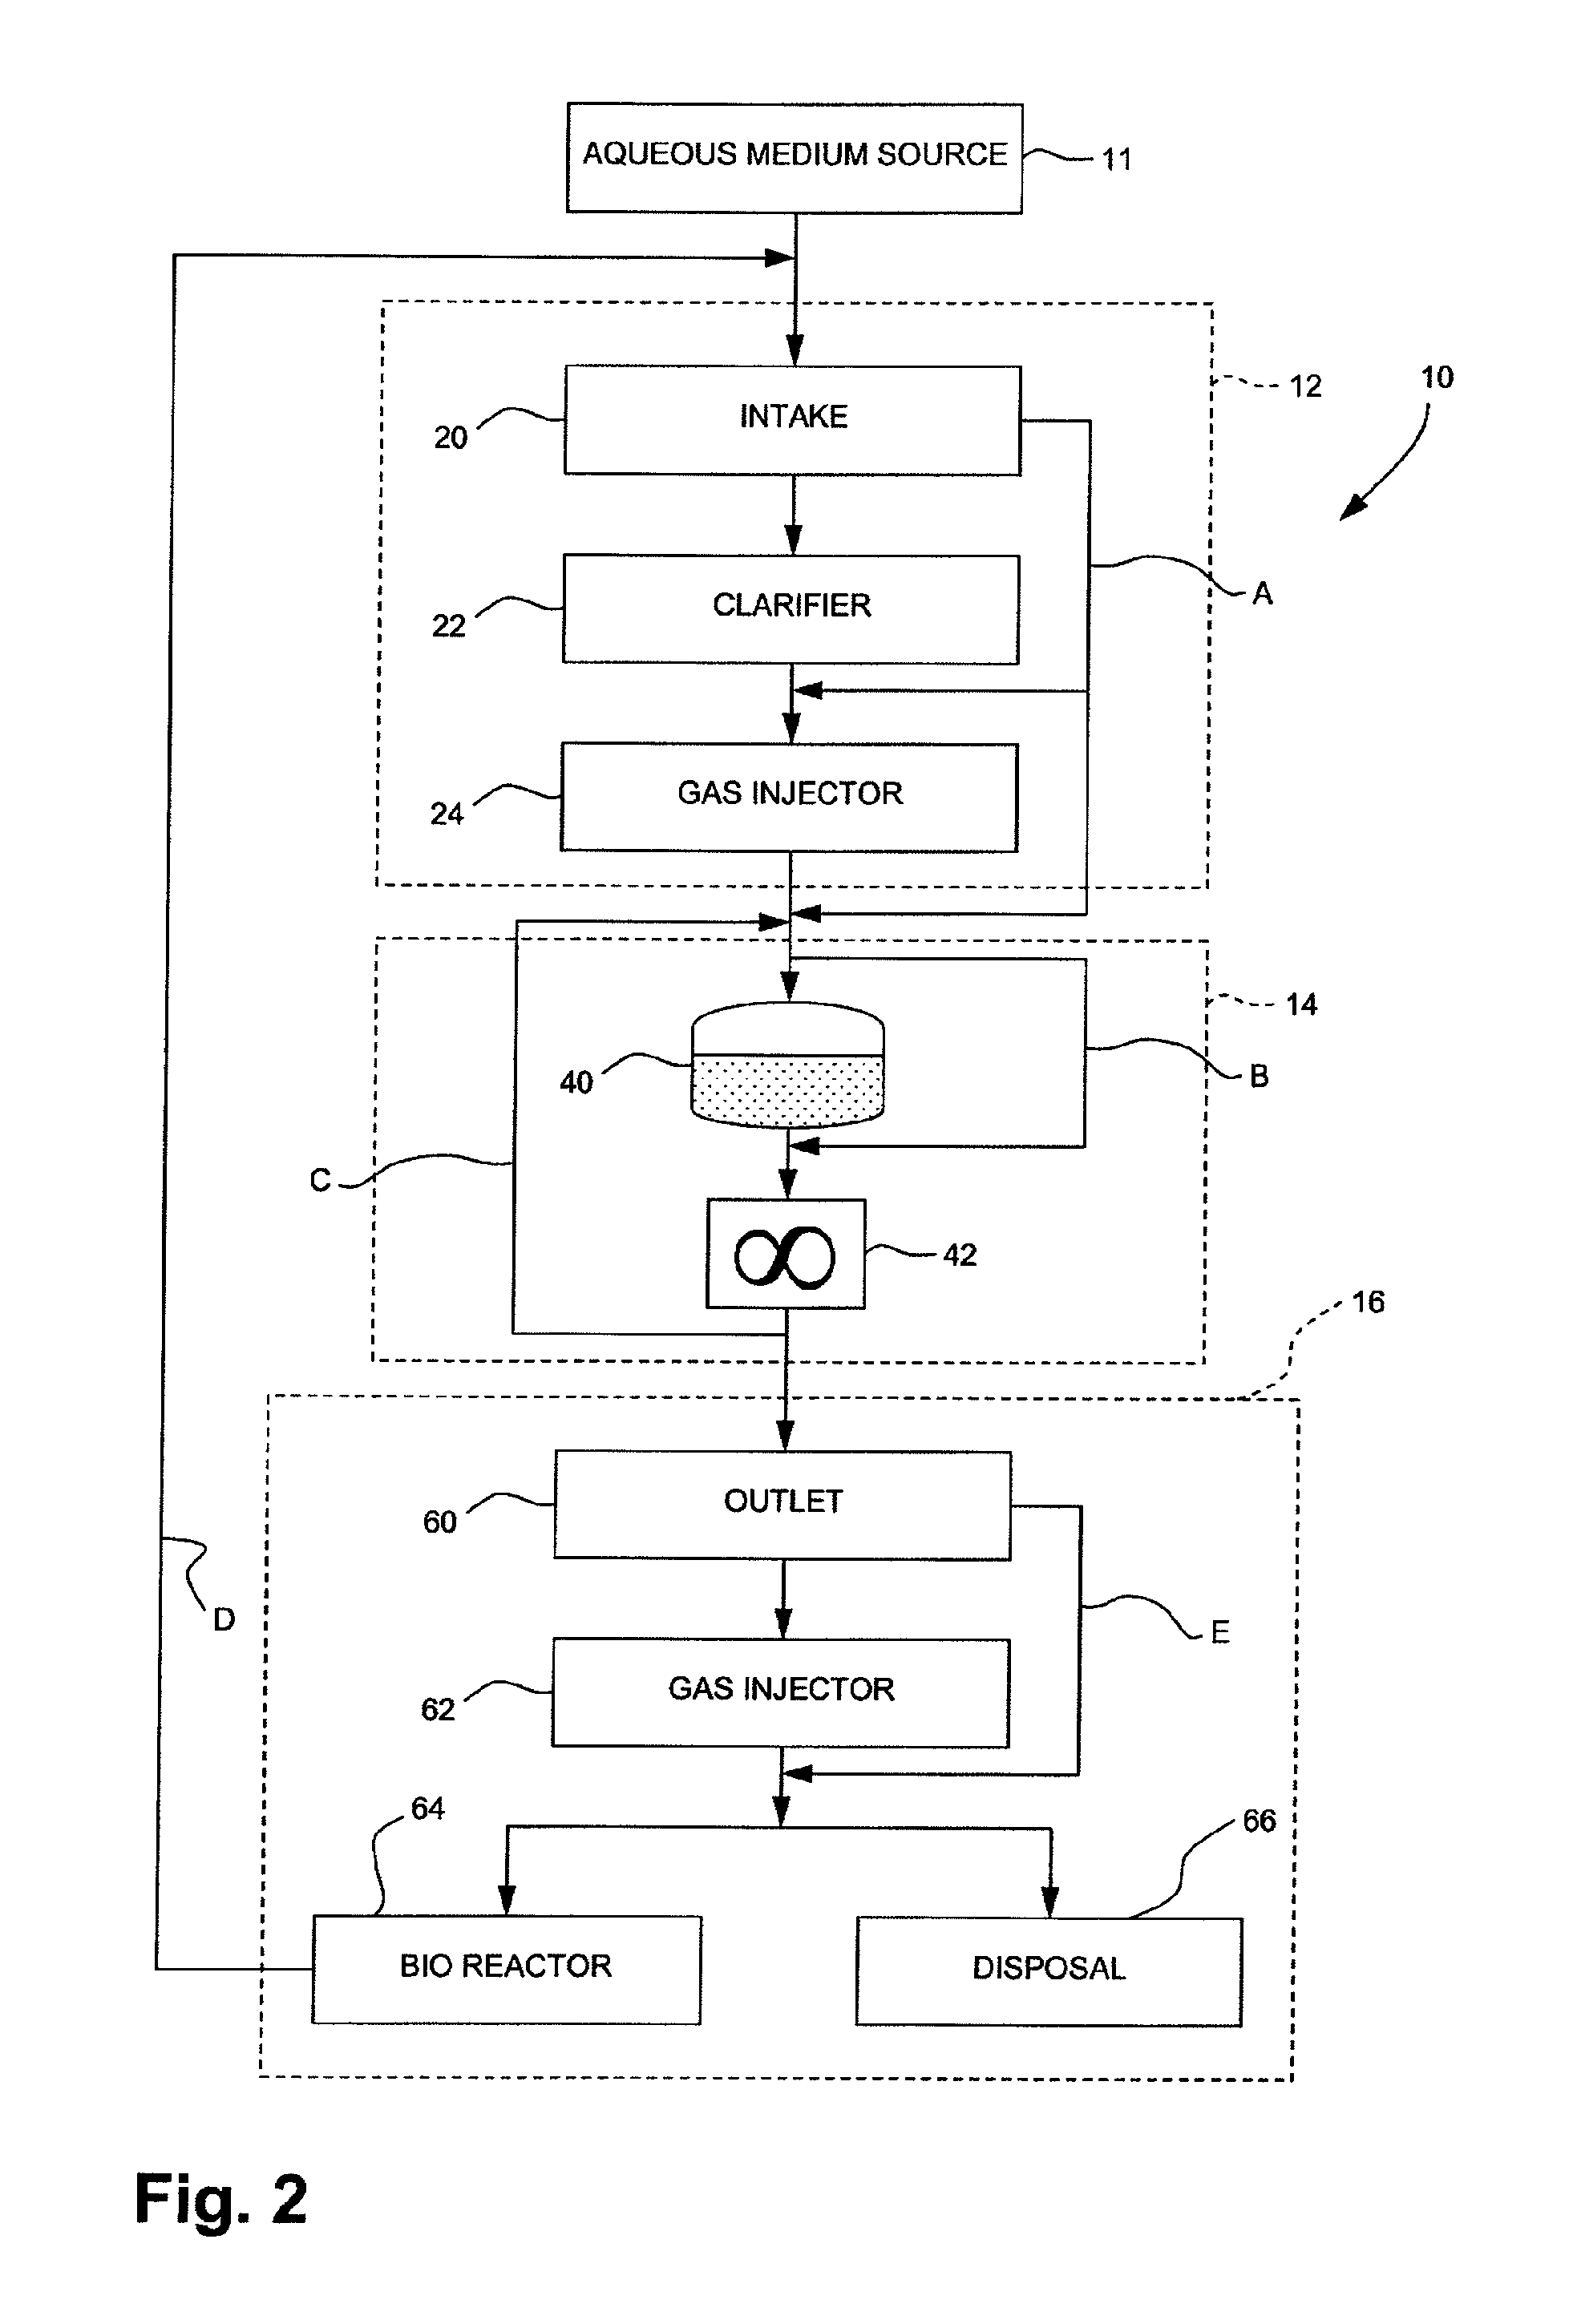 Apparatus and method for the non-chemical stabilization of bio-solids